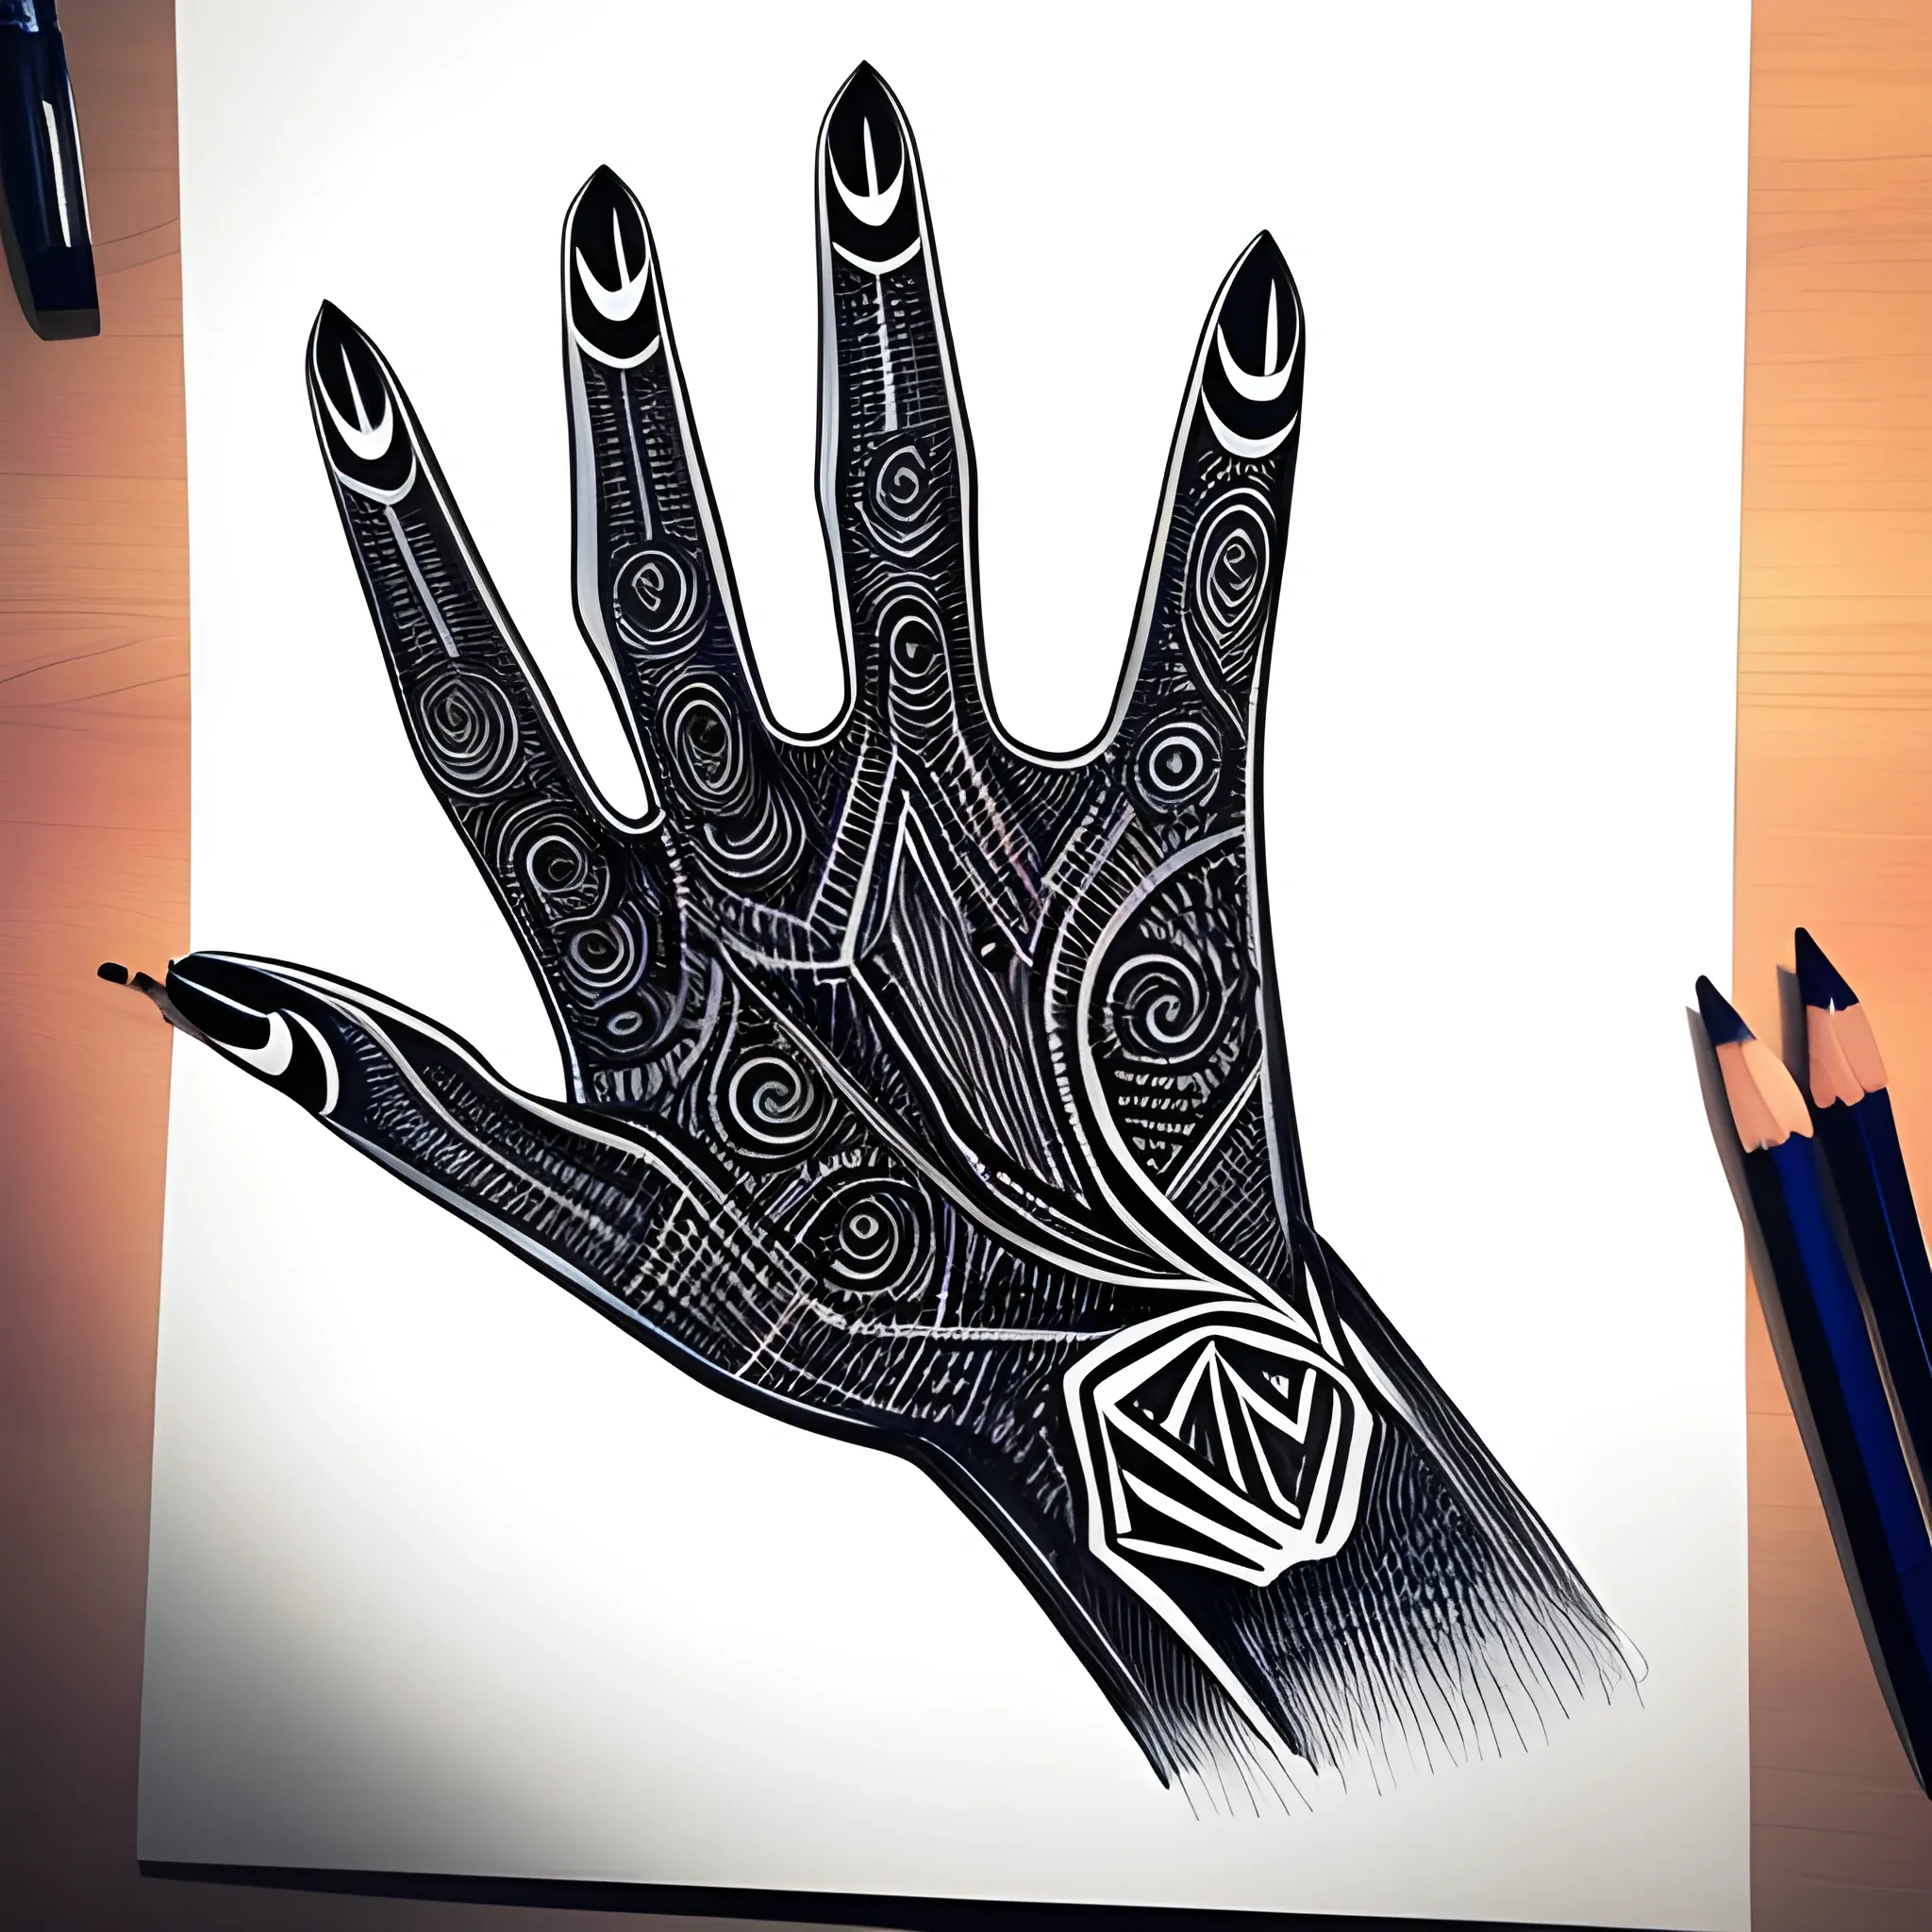 a drawing of a hand with a pattern on it, an abstract drawing by max gubler, instagram contest winner, funk art, childs drawing, art on instagram, myportfolio , Pencil Sketch